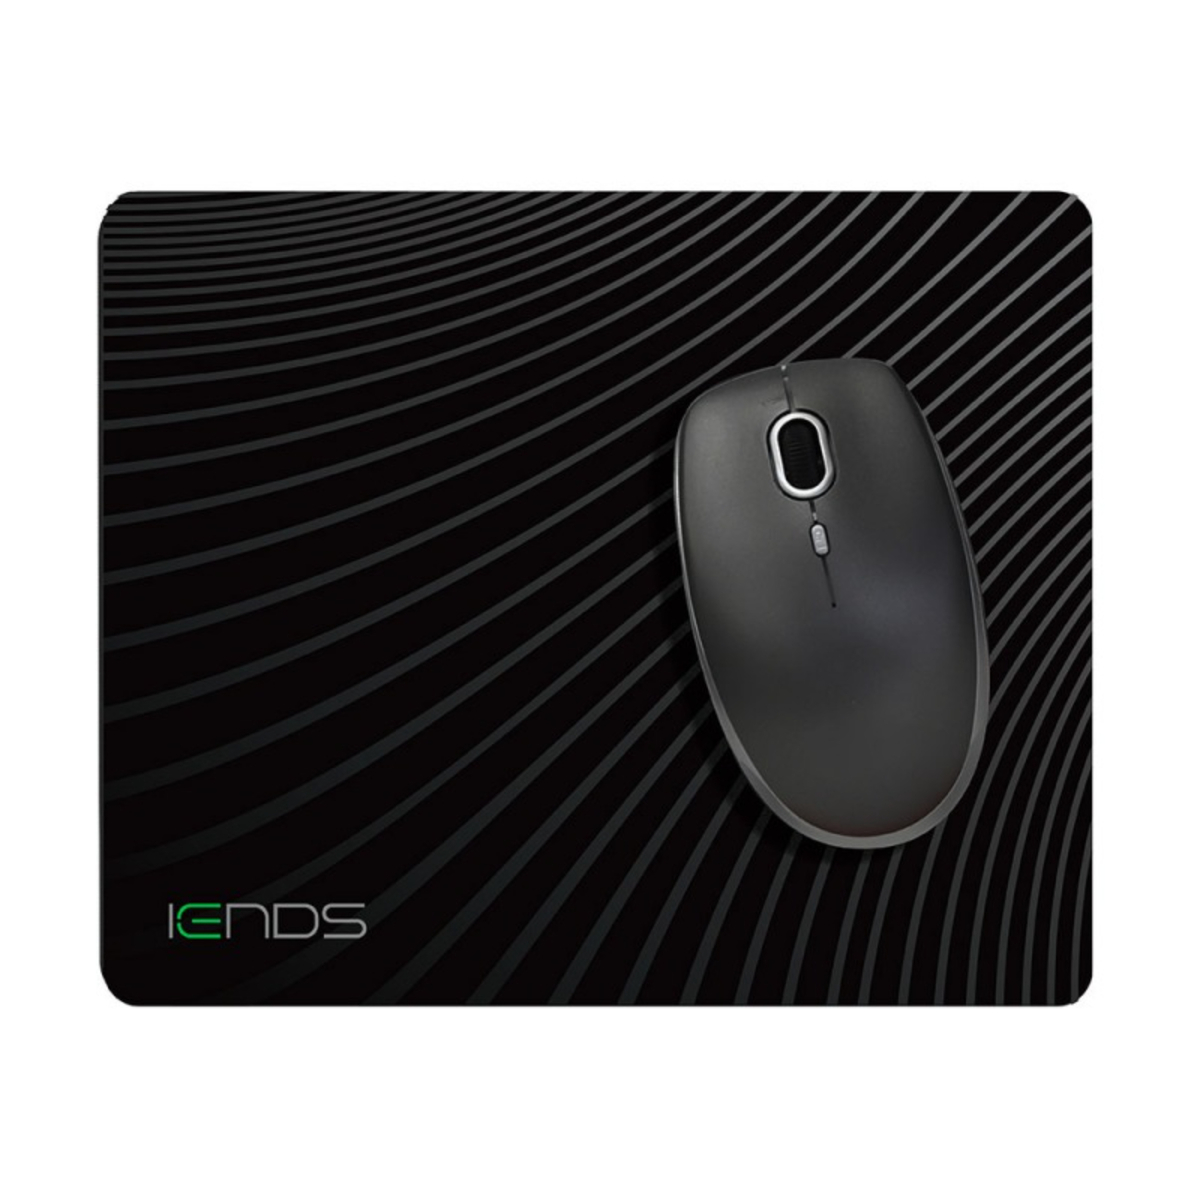 Iends Wireless Mouse with Mouse Pad, Black, MR2083